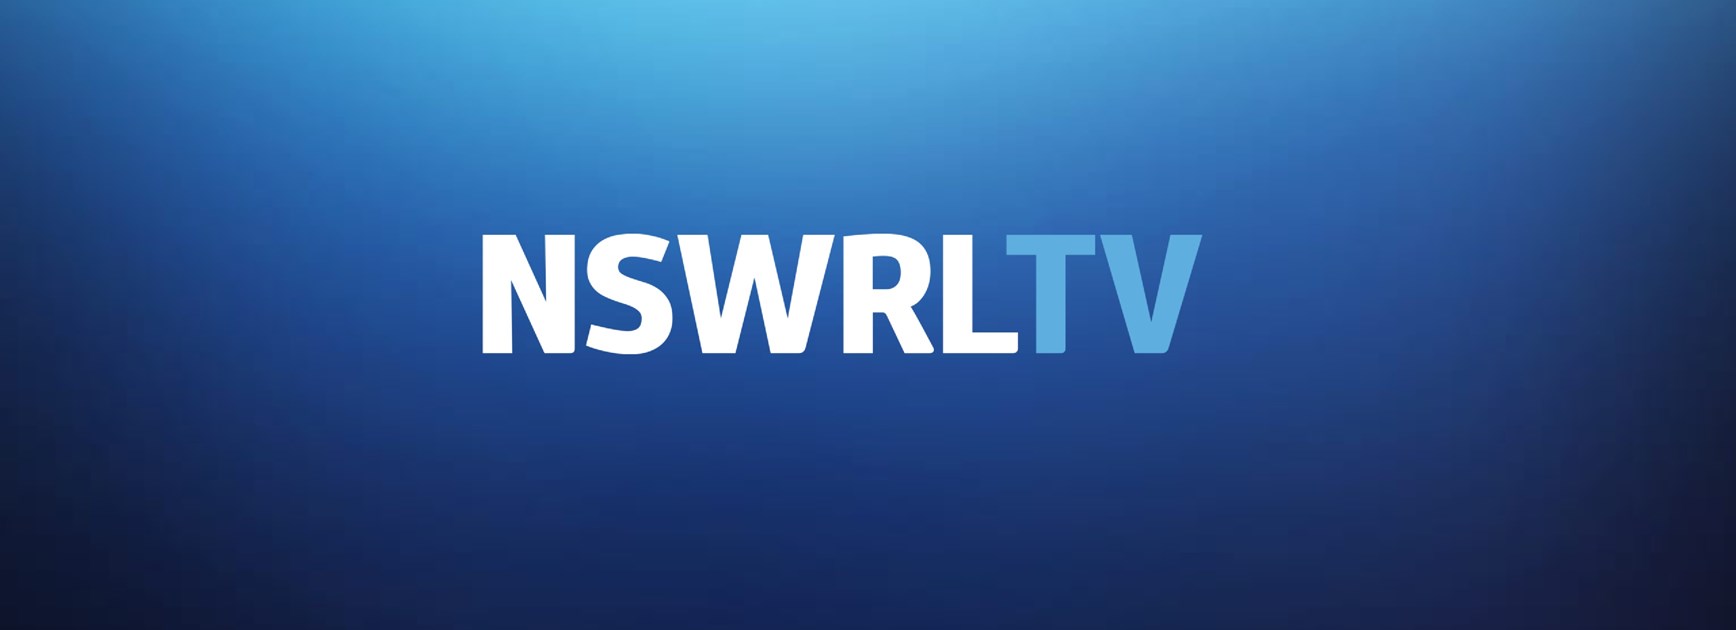 NSWRL TV to showcase more than 250 games to fans